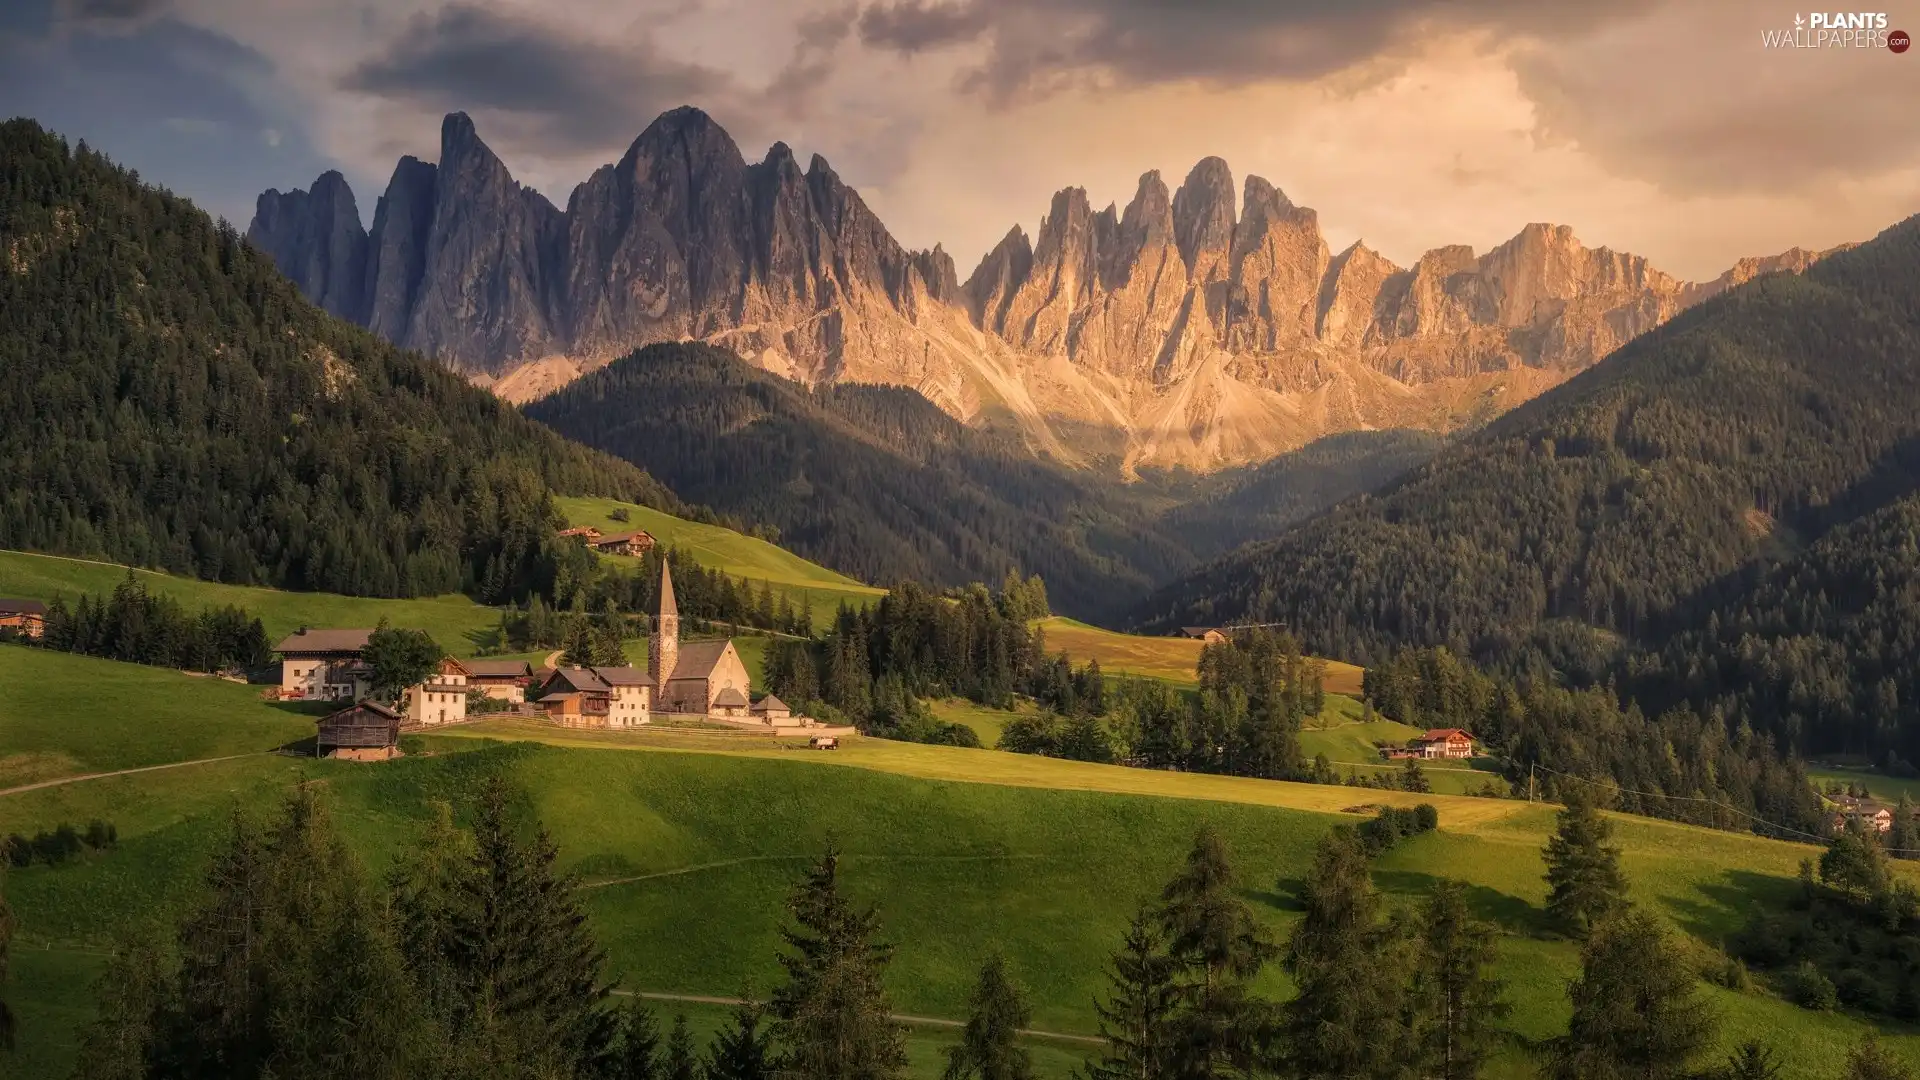 Village of Santa Maddalena, Mountains, trees, Val di Funes Valley, woods, Italy, Church, Massif Odle, Dolomites, buildings, viewes